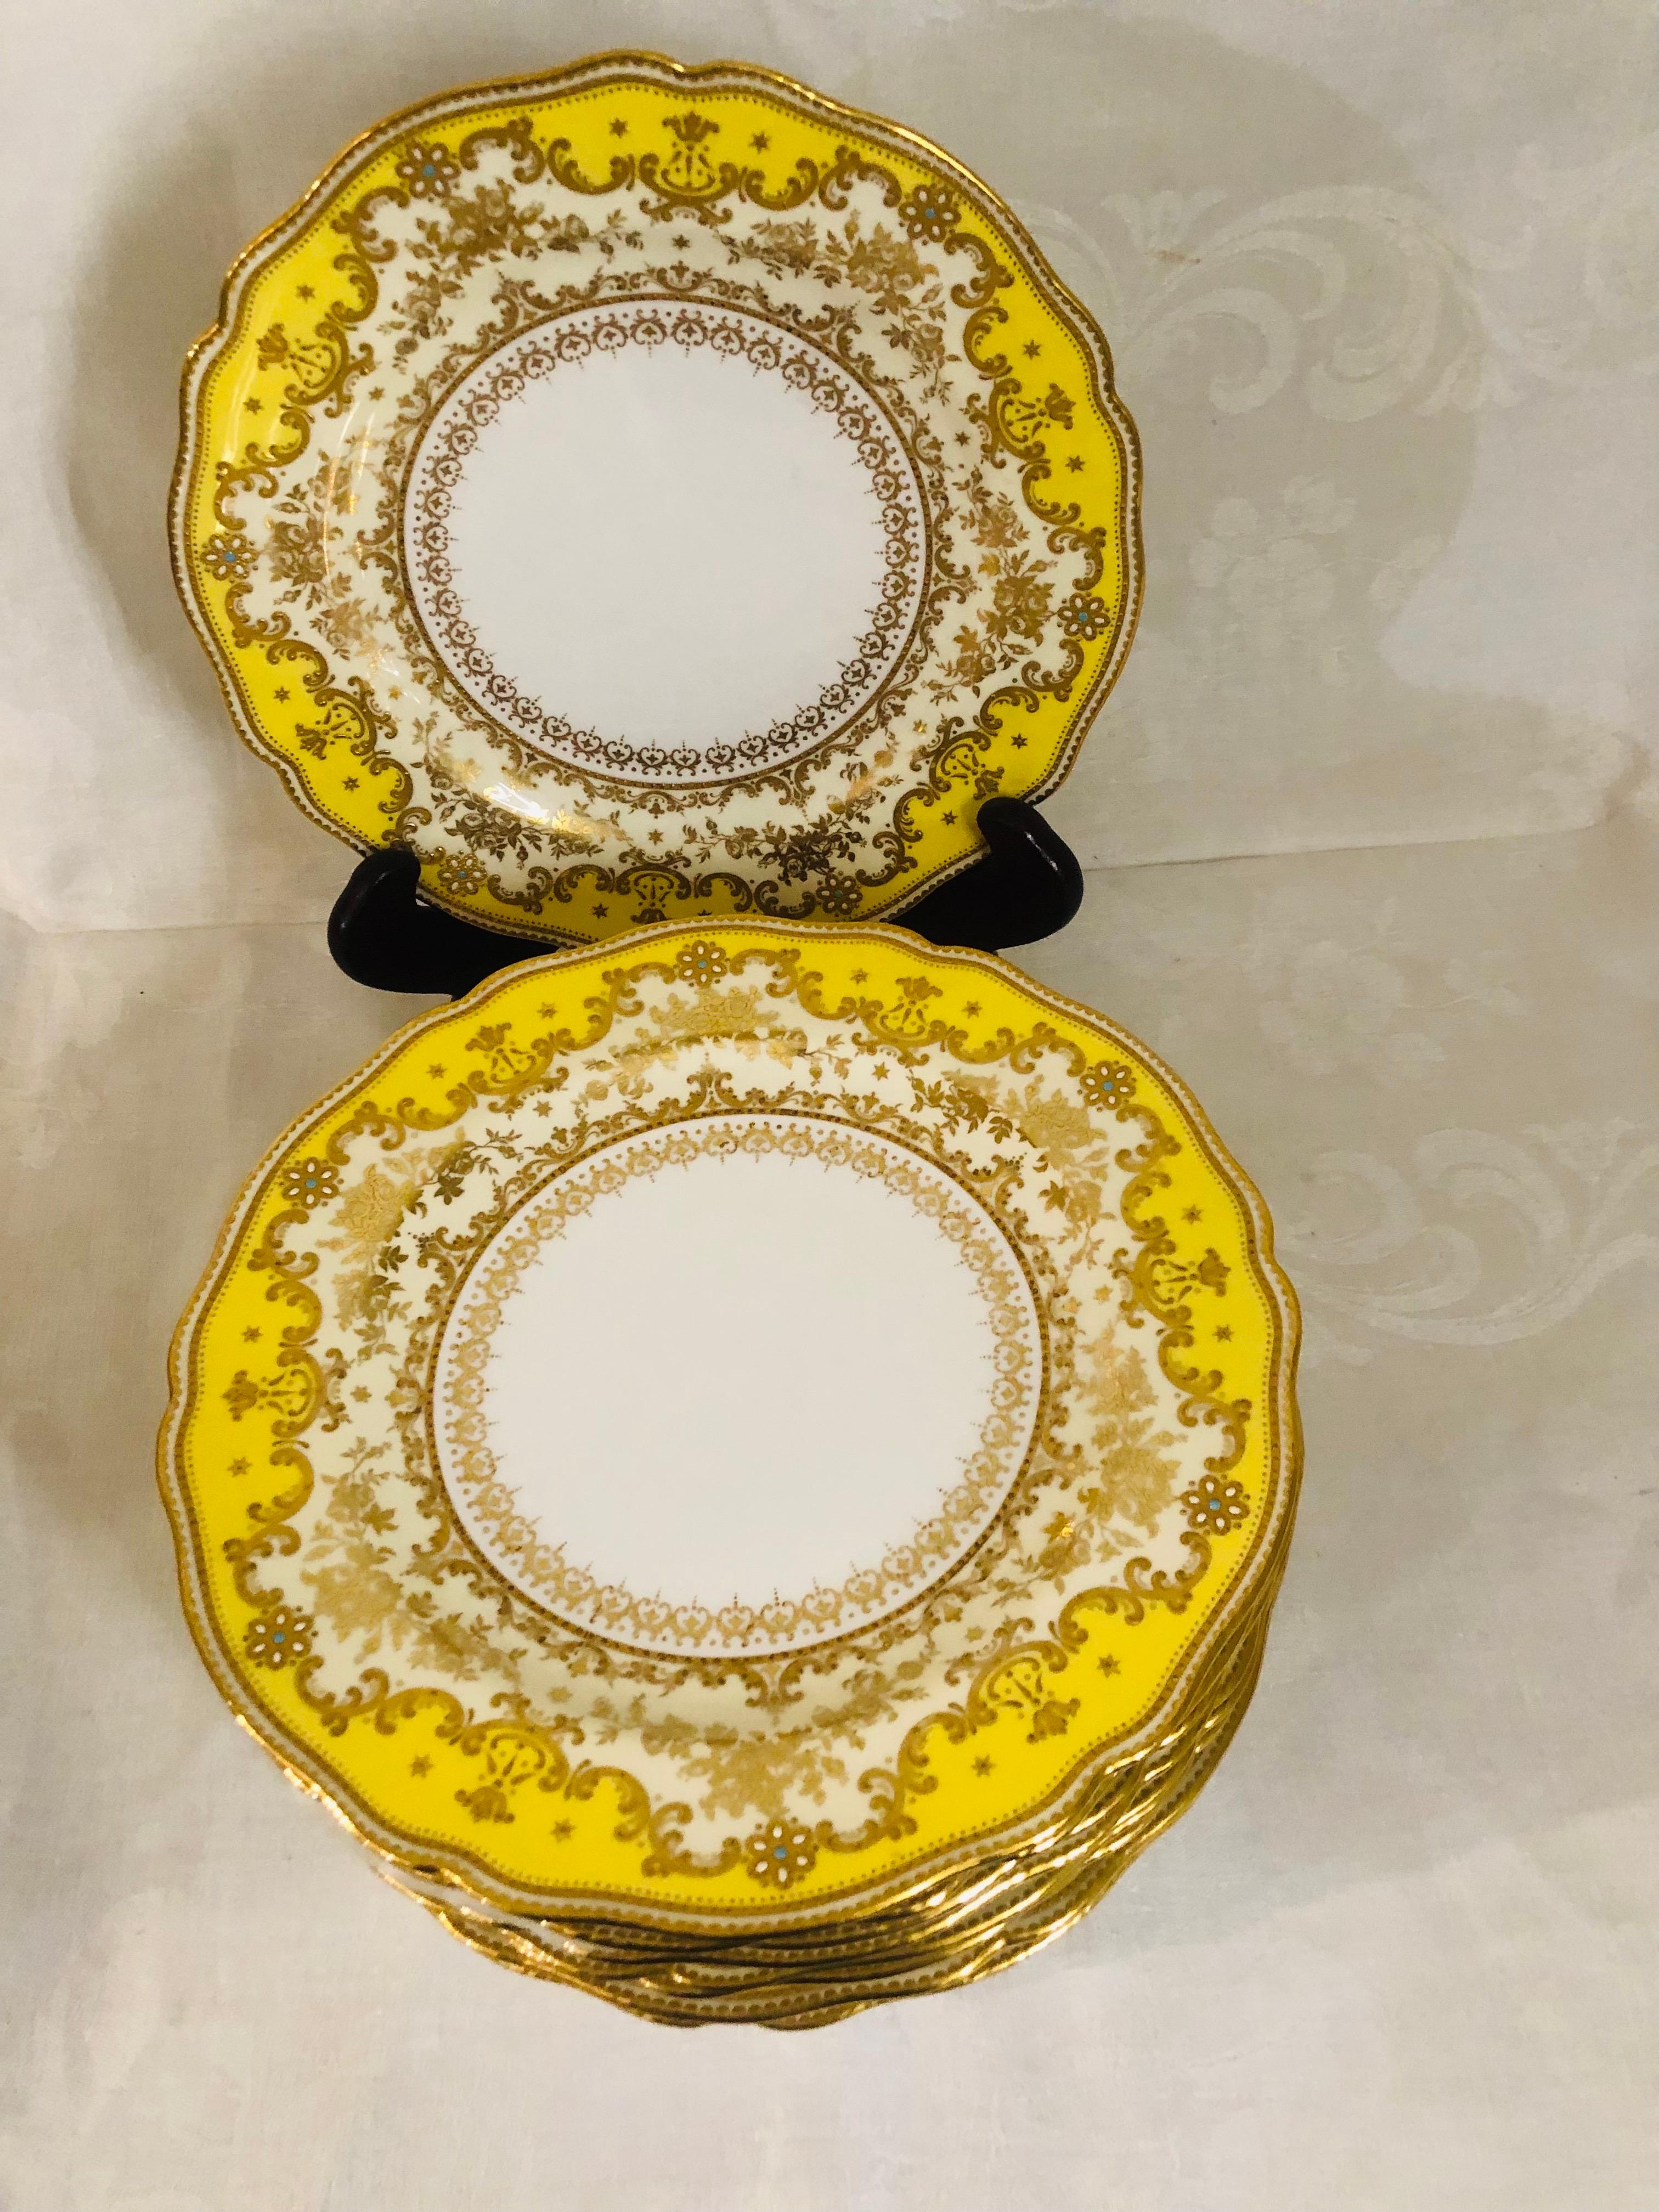 Set of Eleven Yellow Spode Copeland Jeweled Dinner Plates with Raised Gilding 1